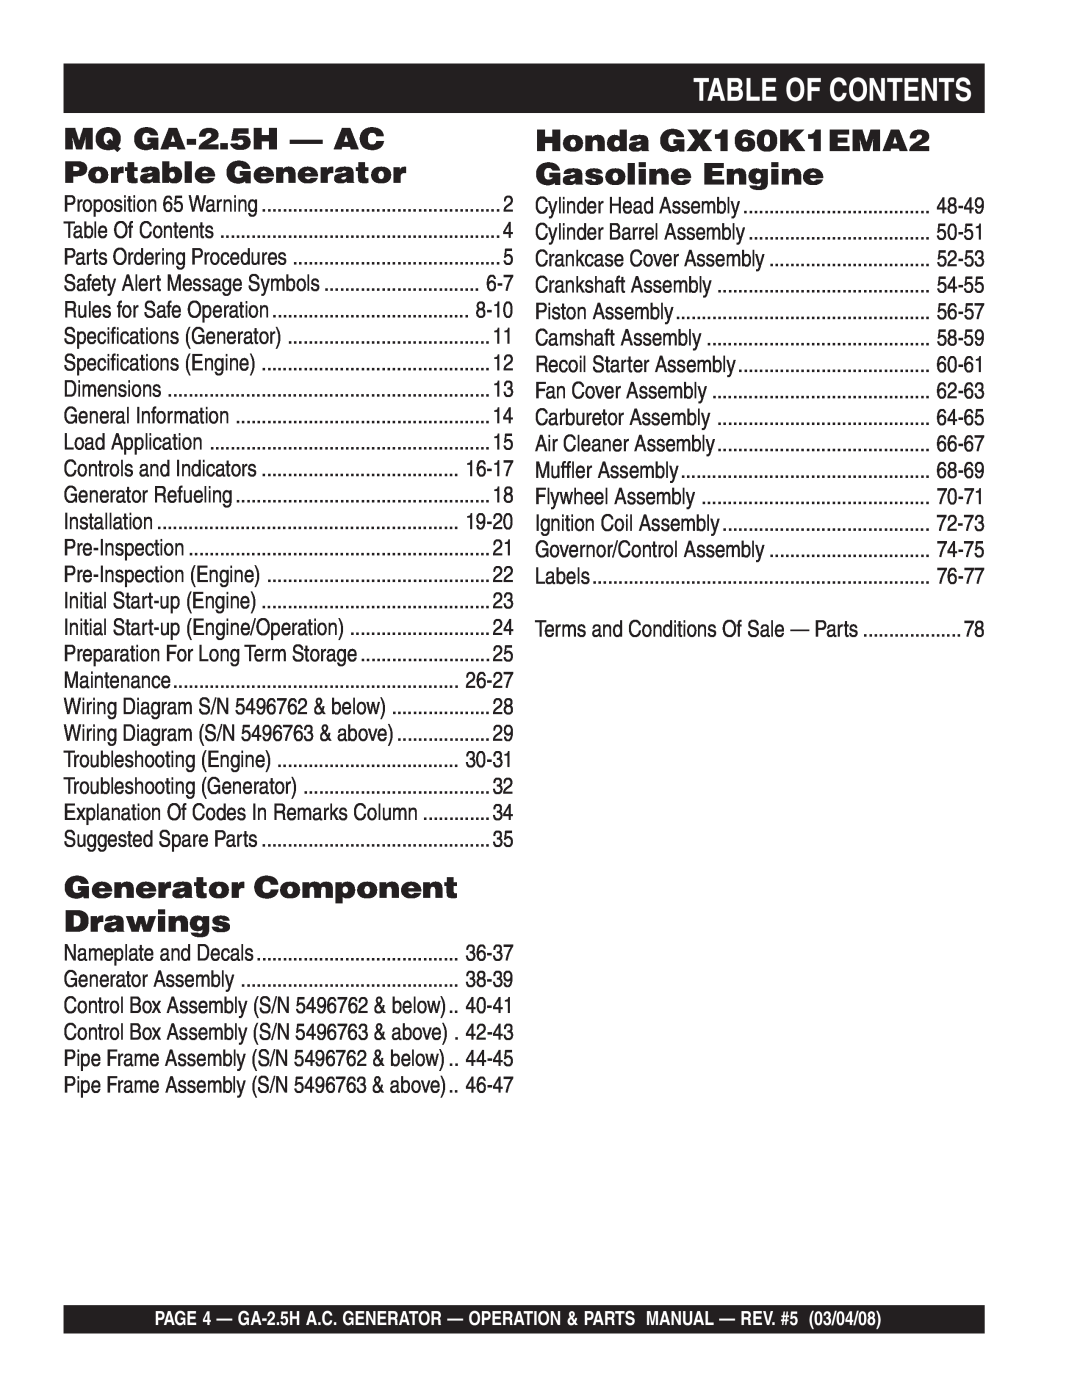 Multiquip Table Of Contents, MQ GA-2.5H - AC, Portable Generator, Generator Component, Drawings, 8-10, Piston Assembly 